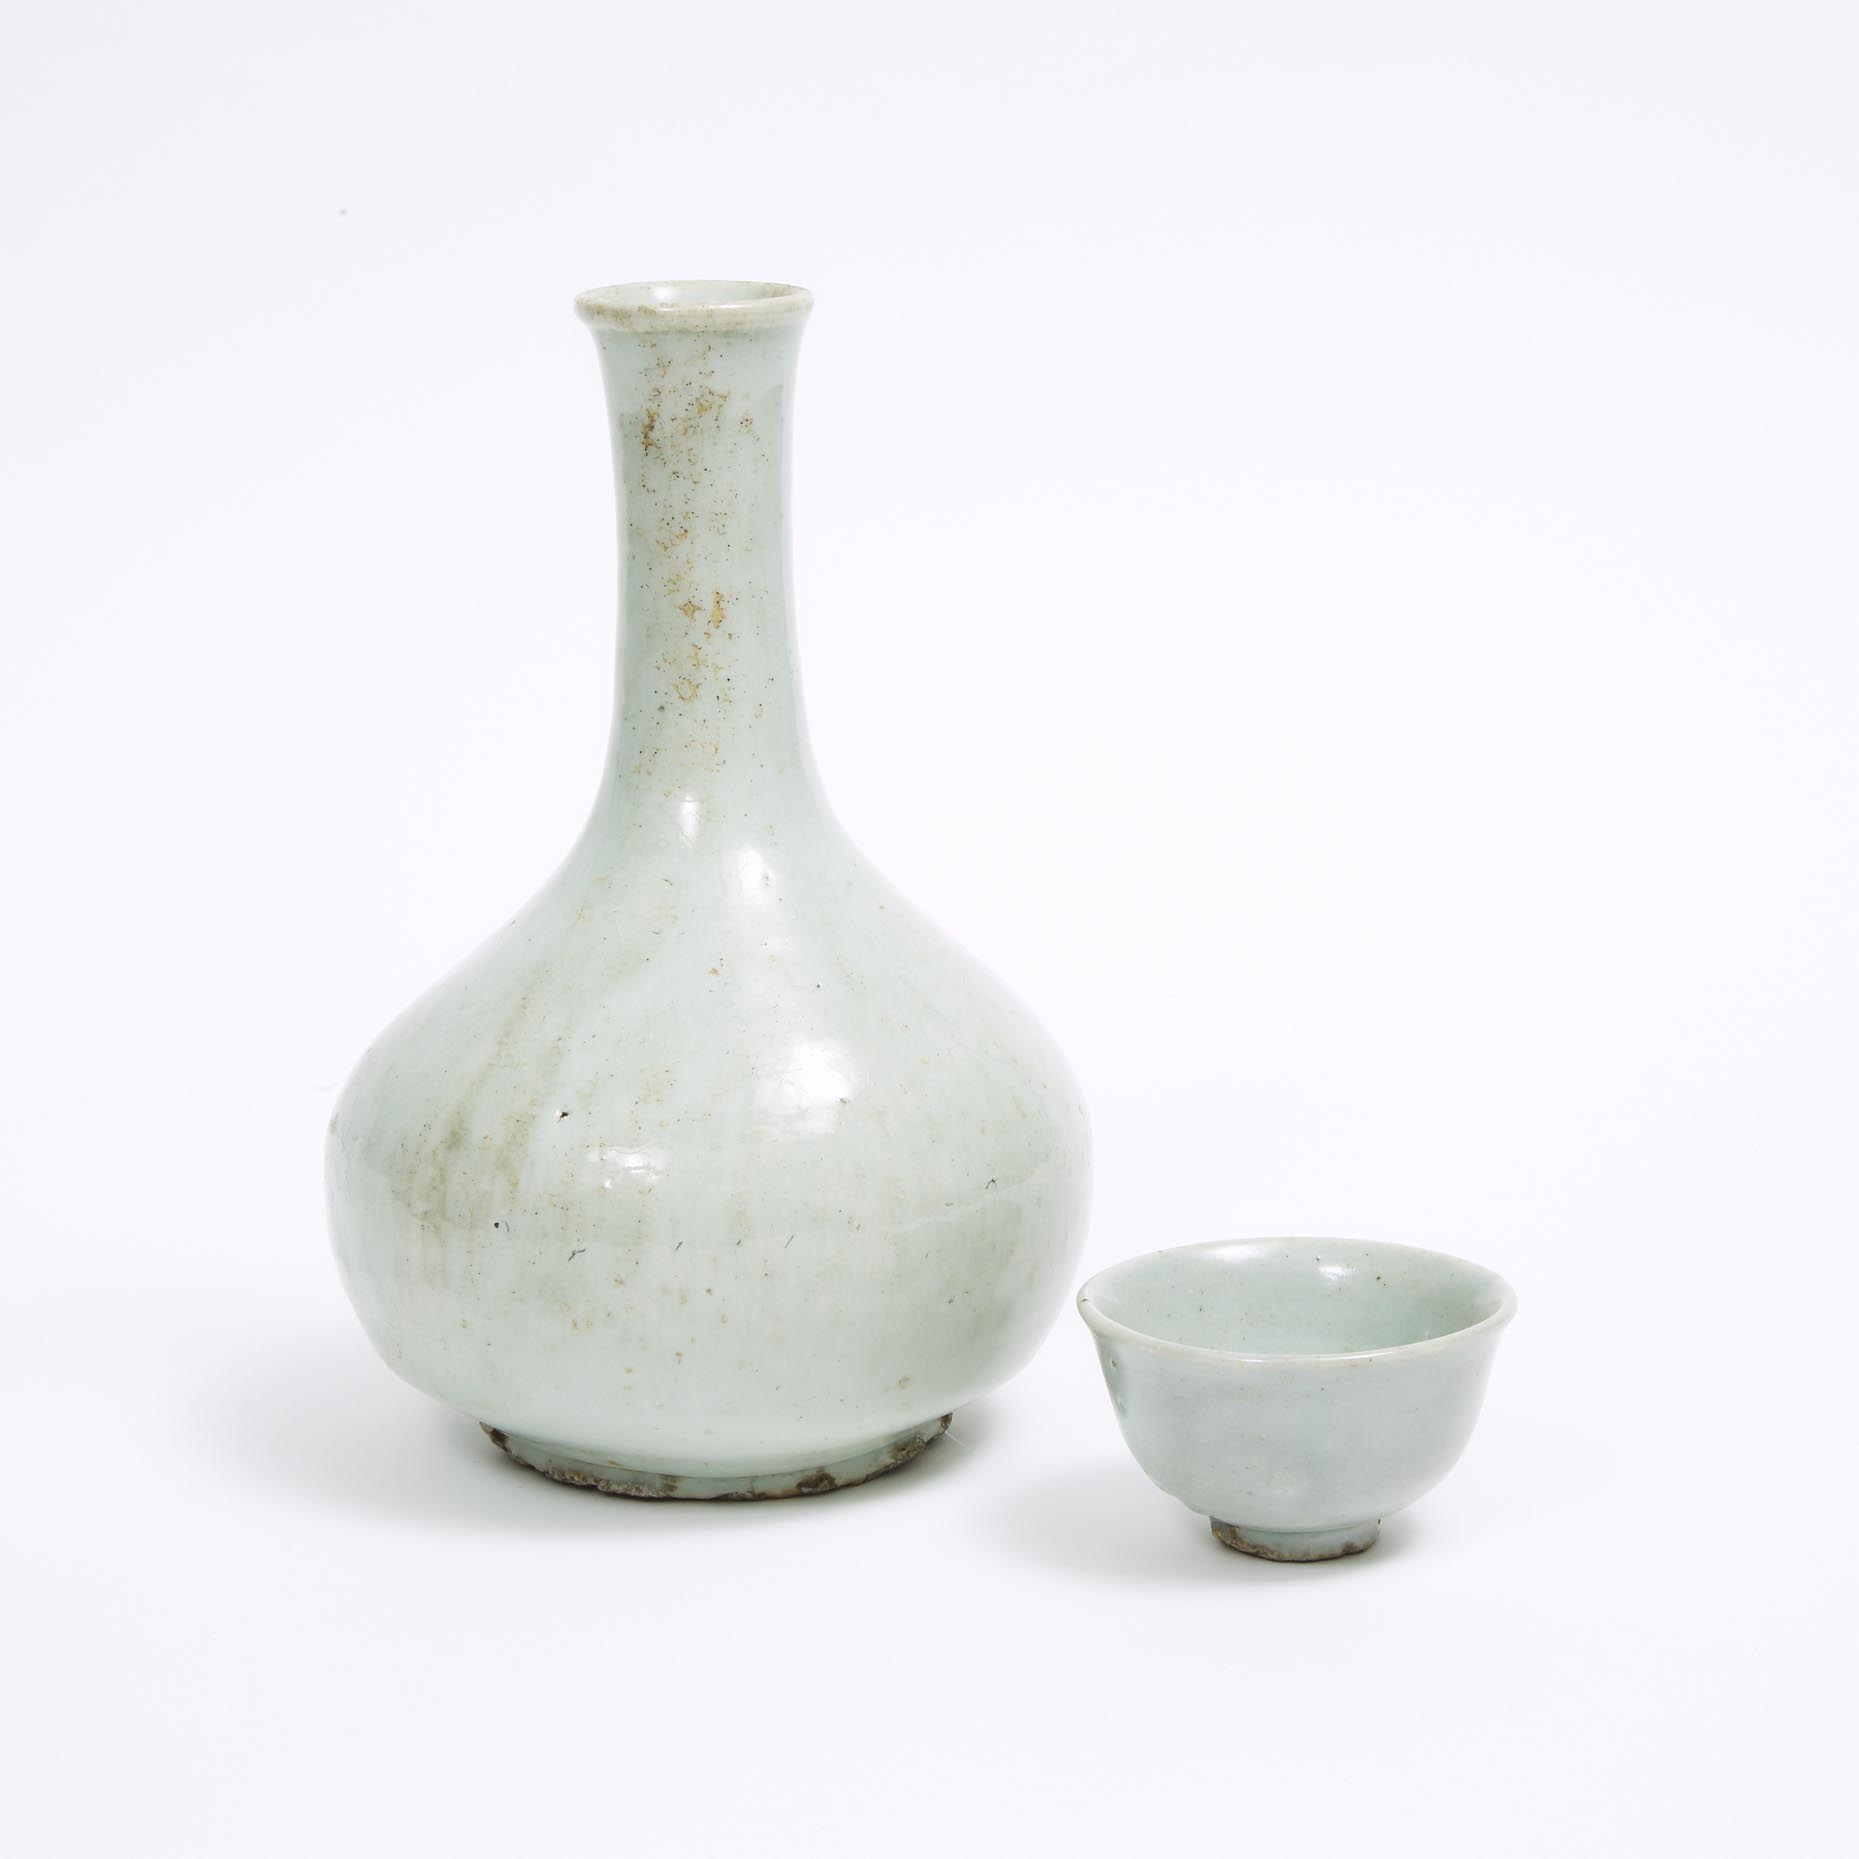 A White Glazed Porcelain Bottle Vase, together with a Cup, Korea, Joseon Dynasty, 19th Century or Earlier